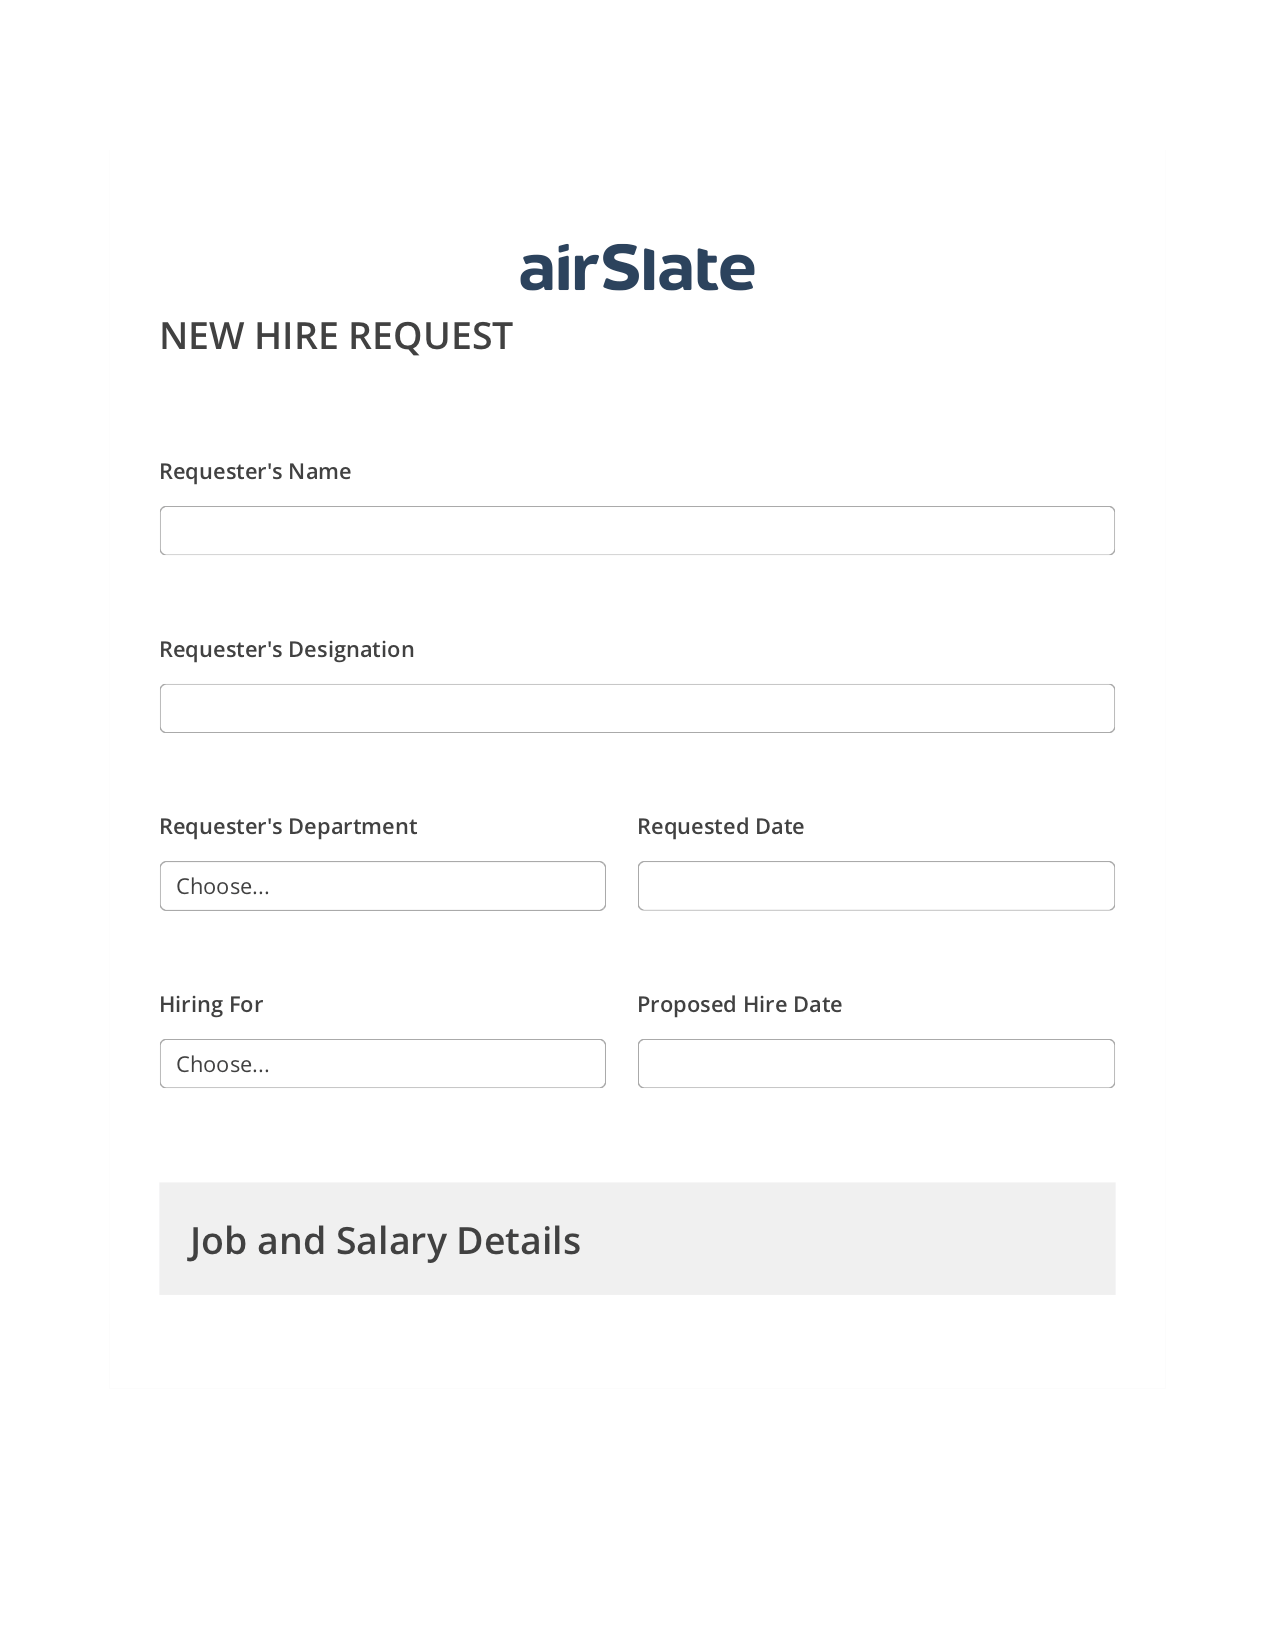 Hiring Request Workflow Pre-fill Dropdowns from MySQL Bot, Hide Signatures Bot, Post-finish Document Bot